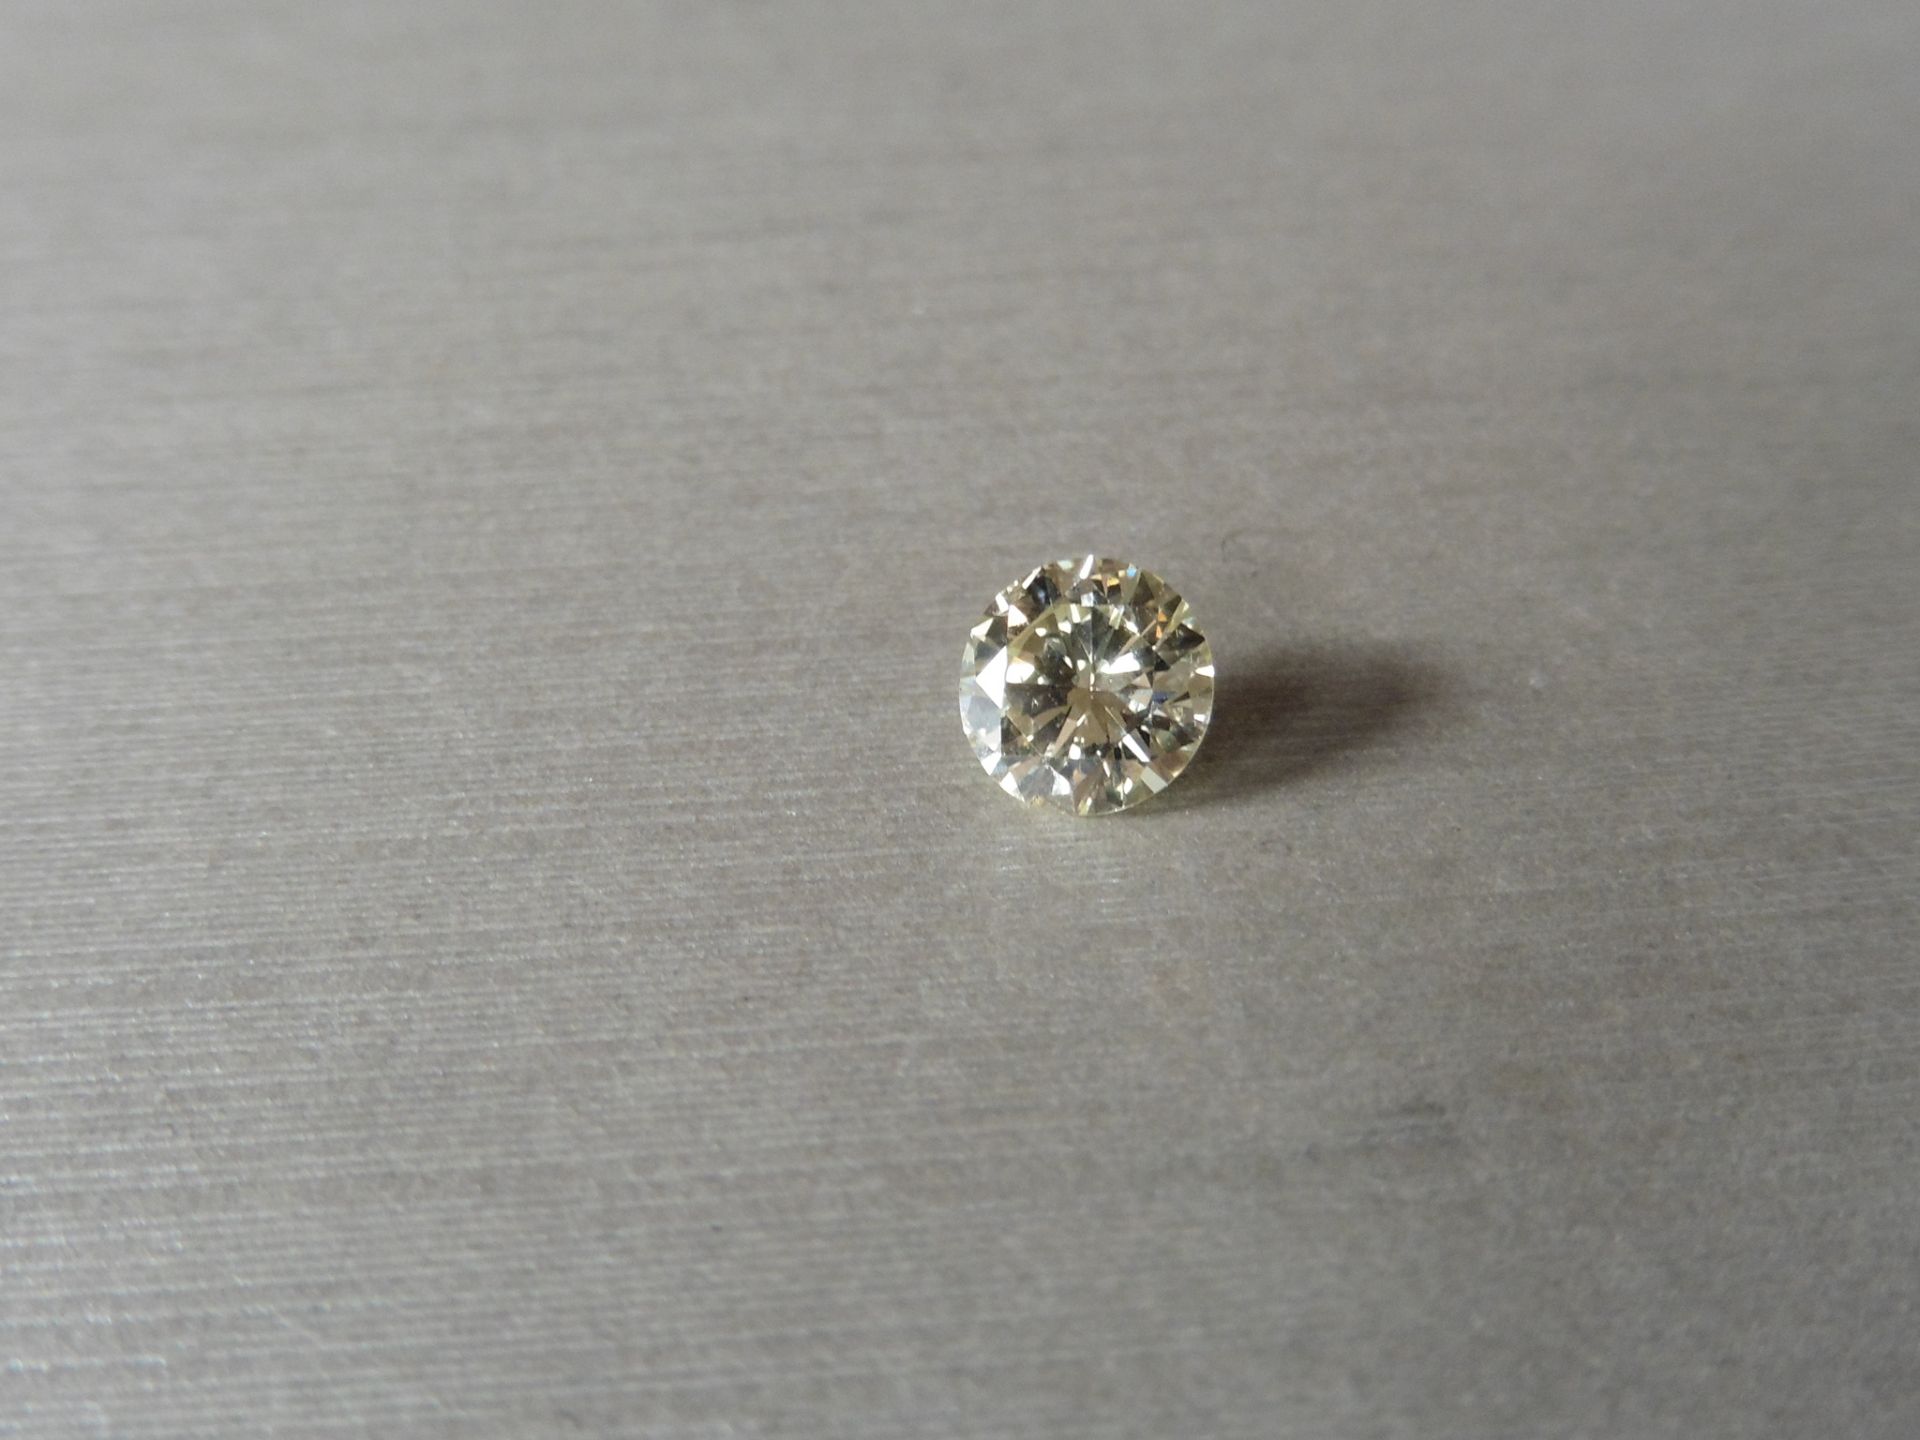 1.08ct loose brilliant cut diamond measuring 6.74 x 3.9mm. K Colour and VS1 clarity. Valued at £ - Image 6 of 6